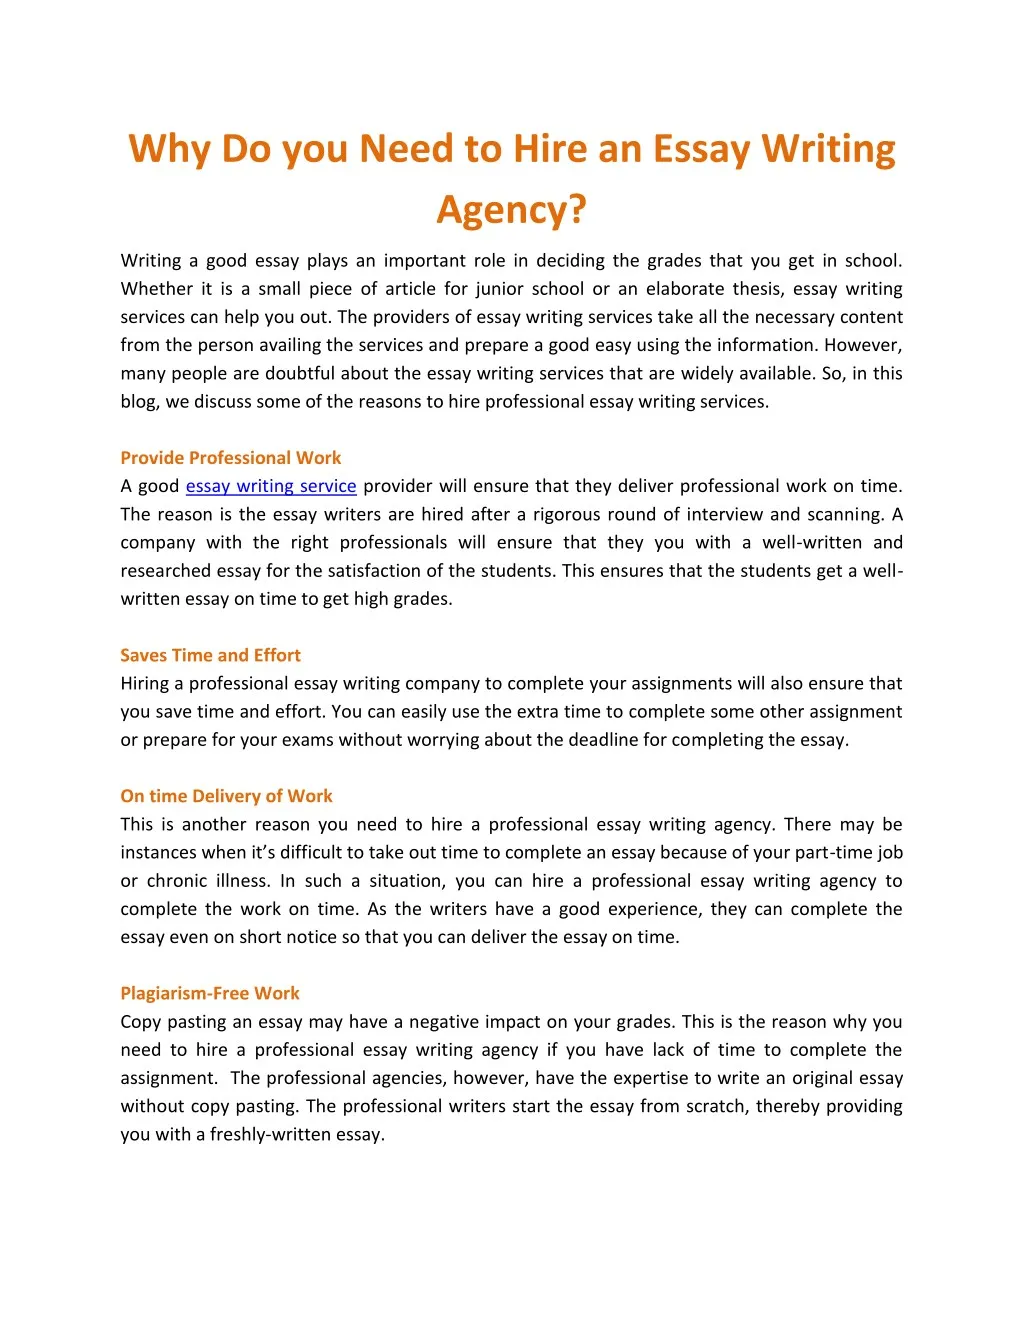 why do you need to hire an essay writing agency